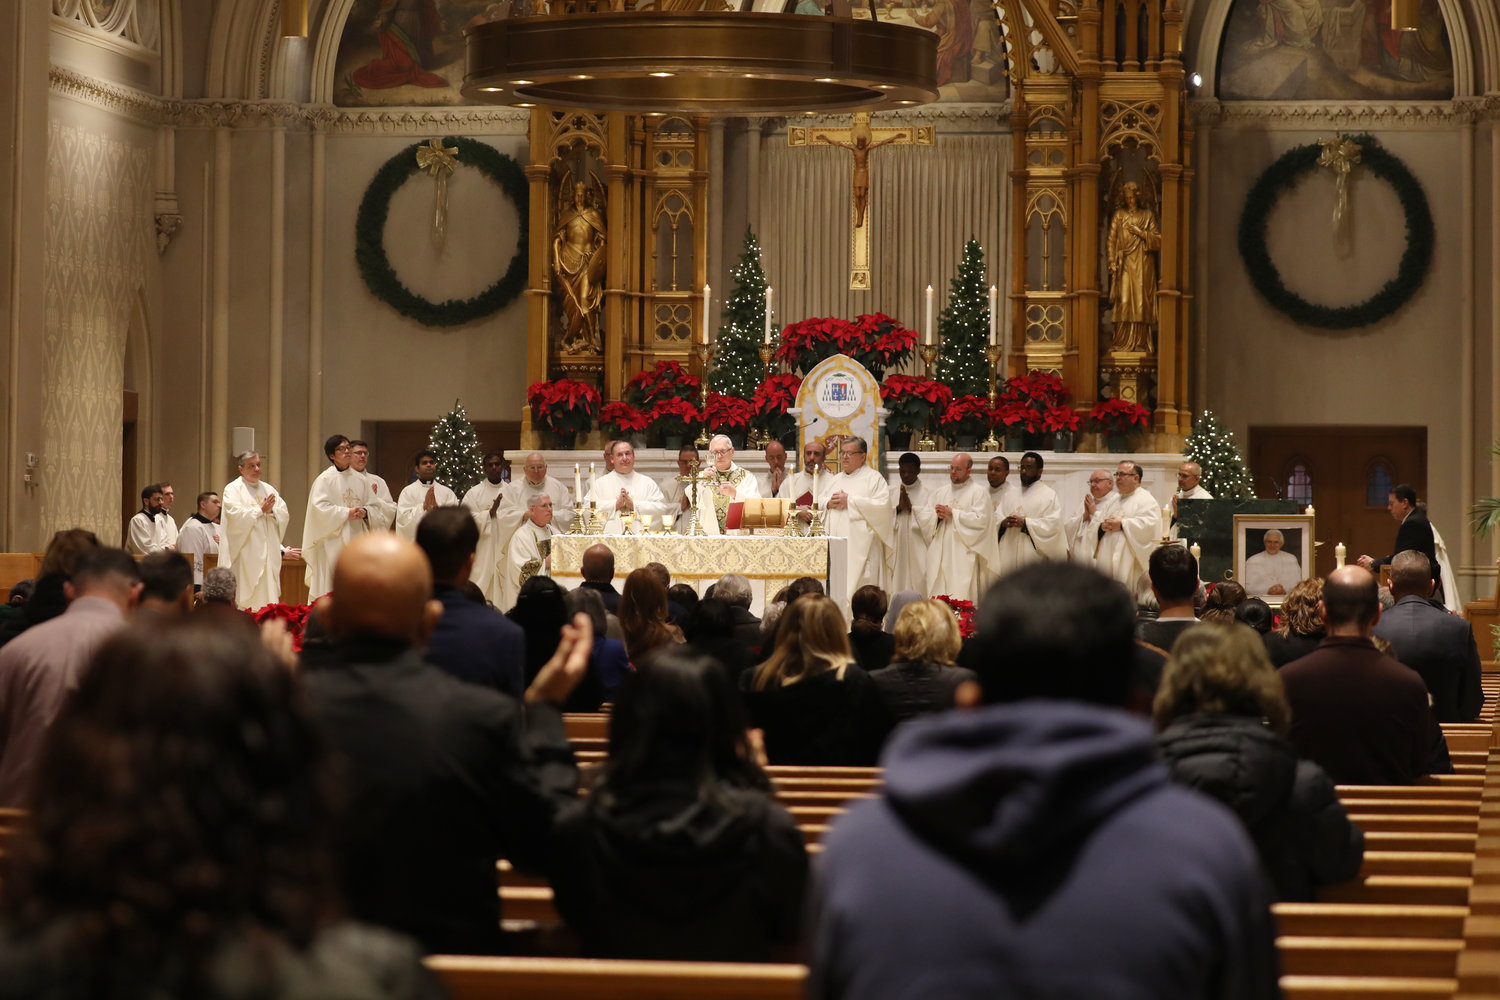 On Jan. 5, Bishop Thomas J. Tobin celebrated Holy Mass at the Cathedral of SS. Peter and Paul, Providence, to pray for the repose of the soul of Pope Emeritus Benedict XVI, who returned home to the Lord December 31, 2022. “As we come to this Holy Eucharist, we thank God — solemnly and profoundly — for the life and ministry of Pope Benedict… May our Blessed Mother accompany him on his heavenly pilgrimage and may he rest in peace,” said Bishop Tobin.